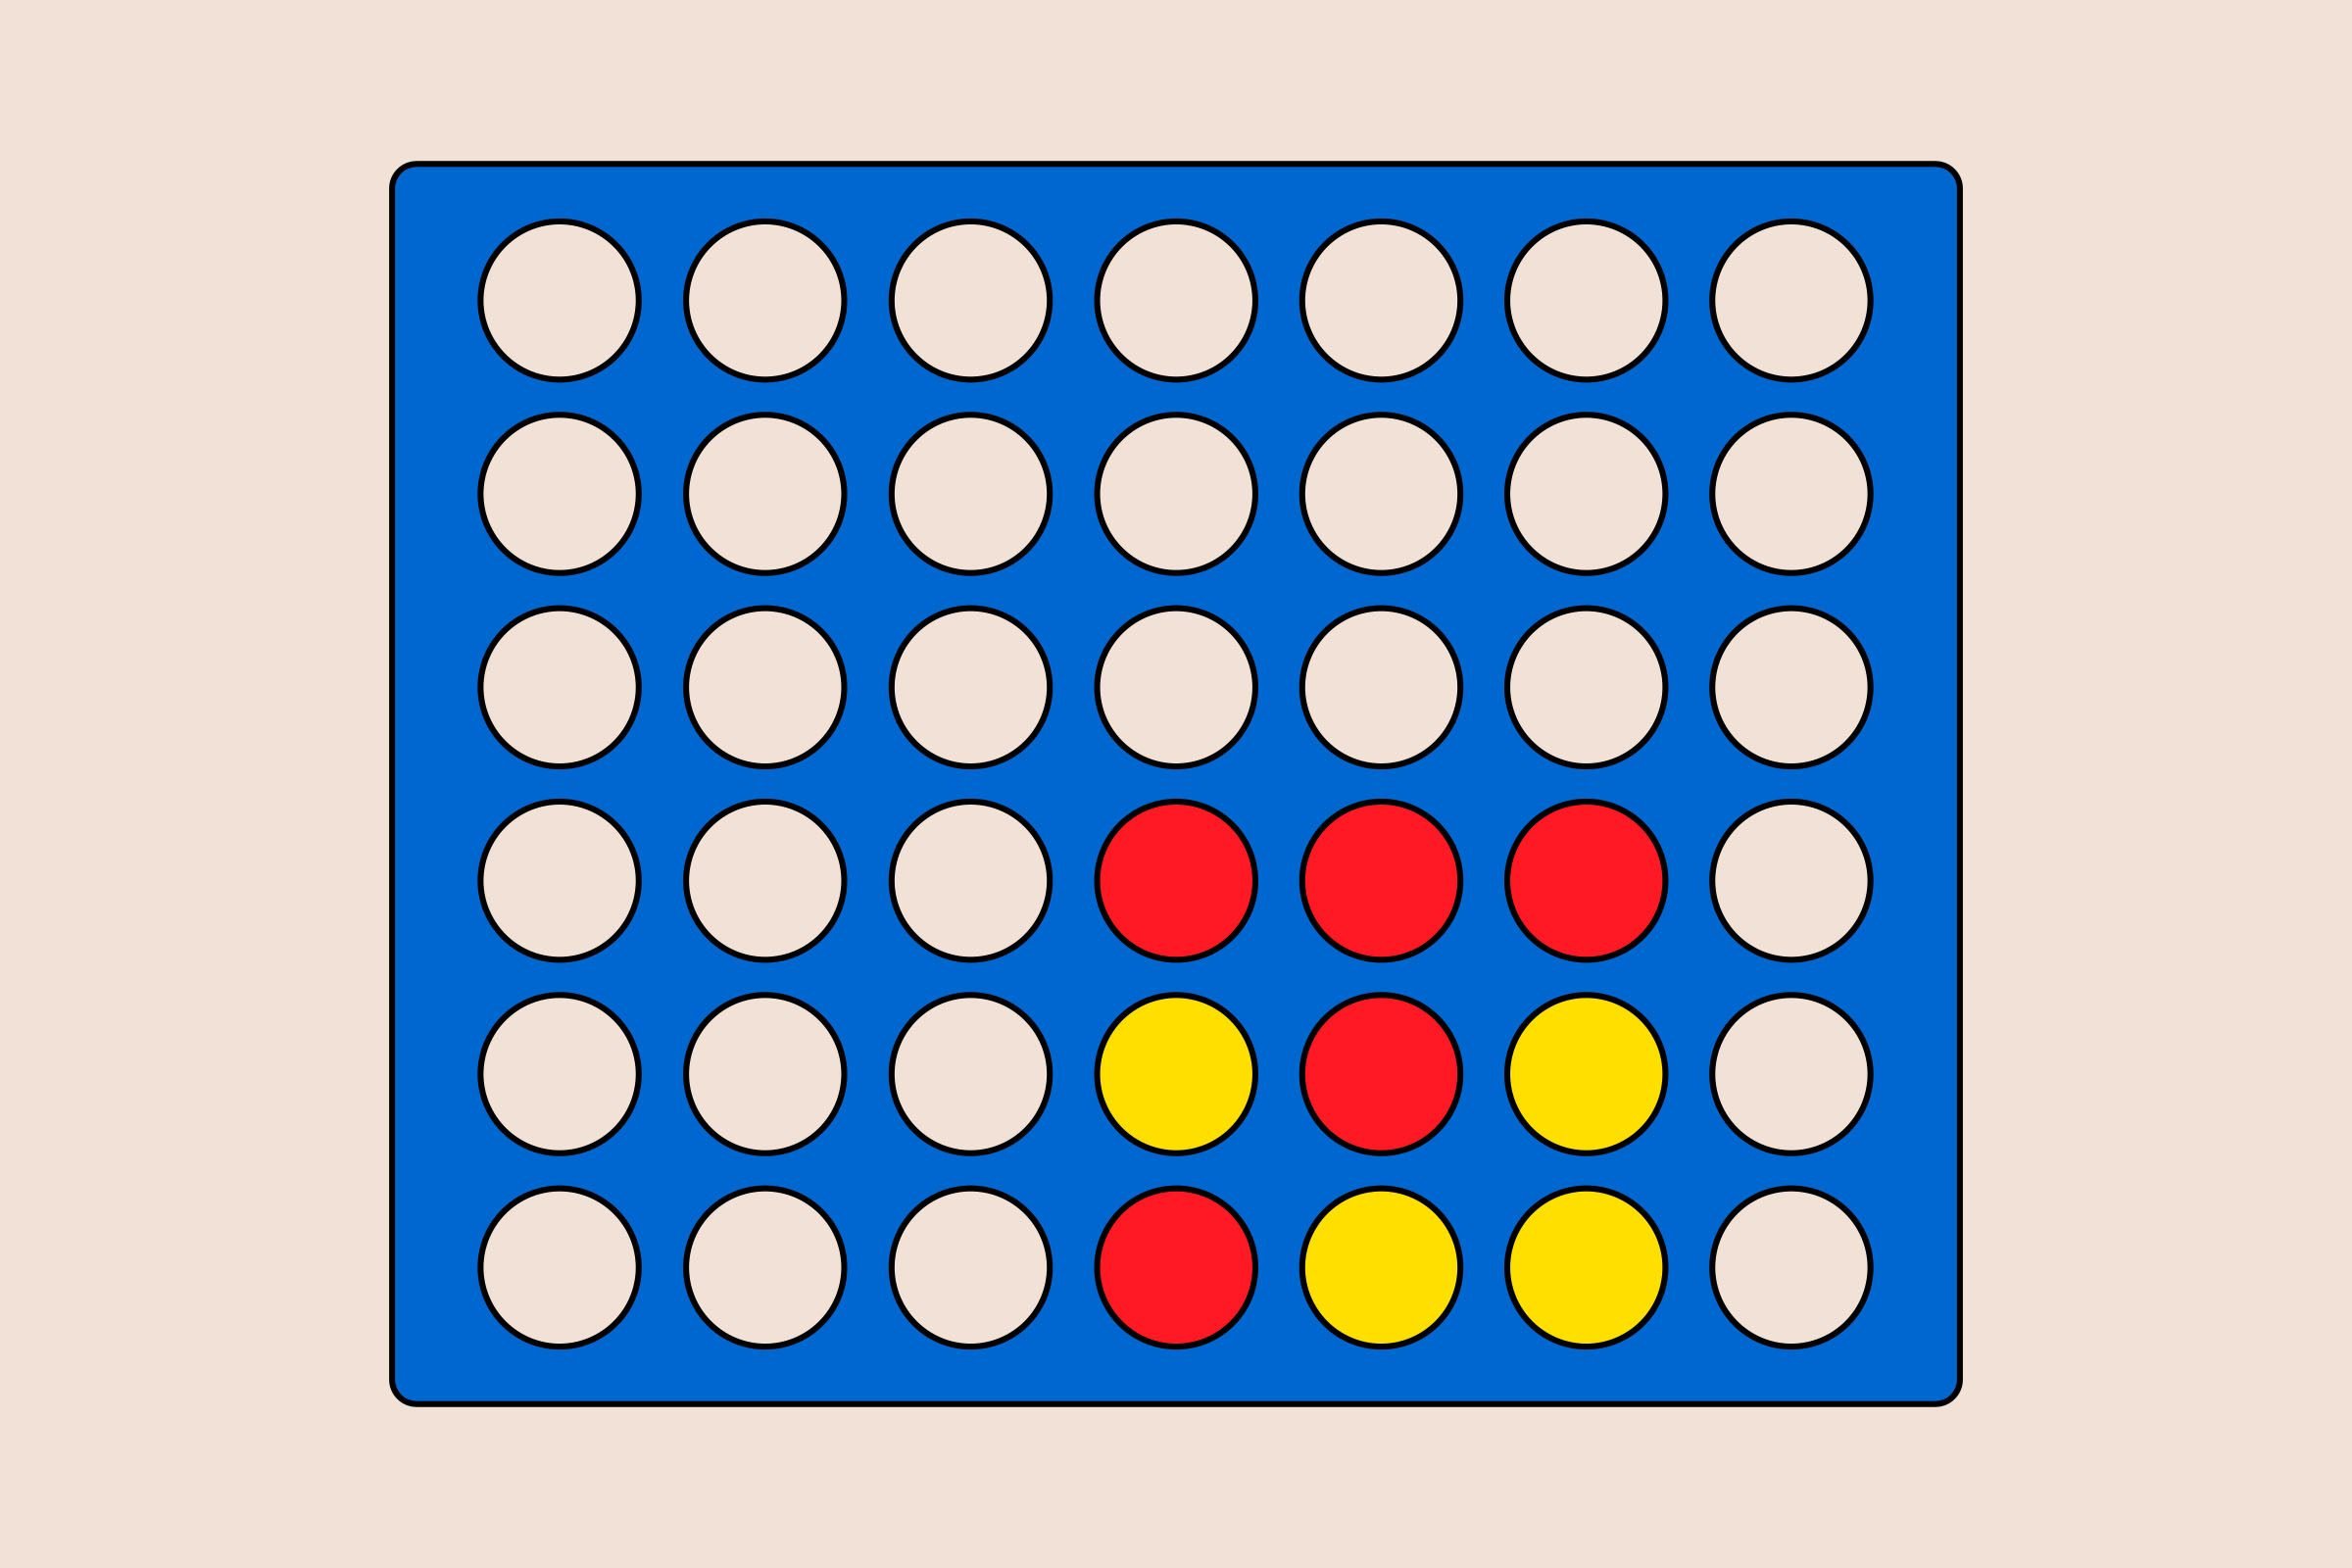 Connect Four game board showing a "Figure 7 trap"